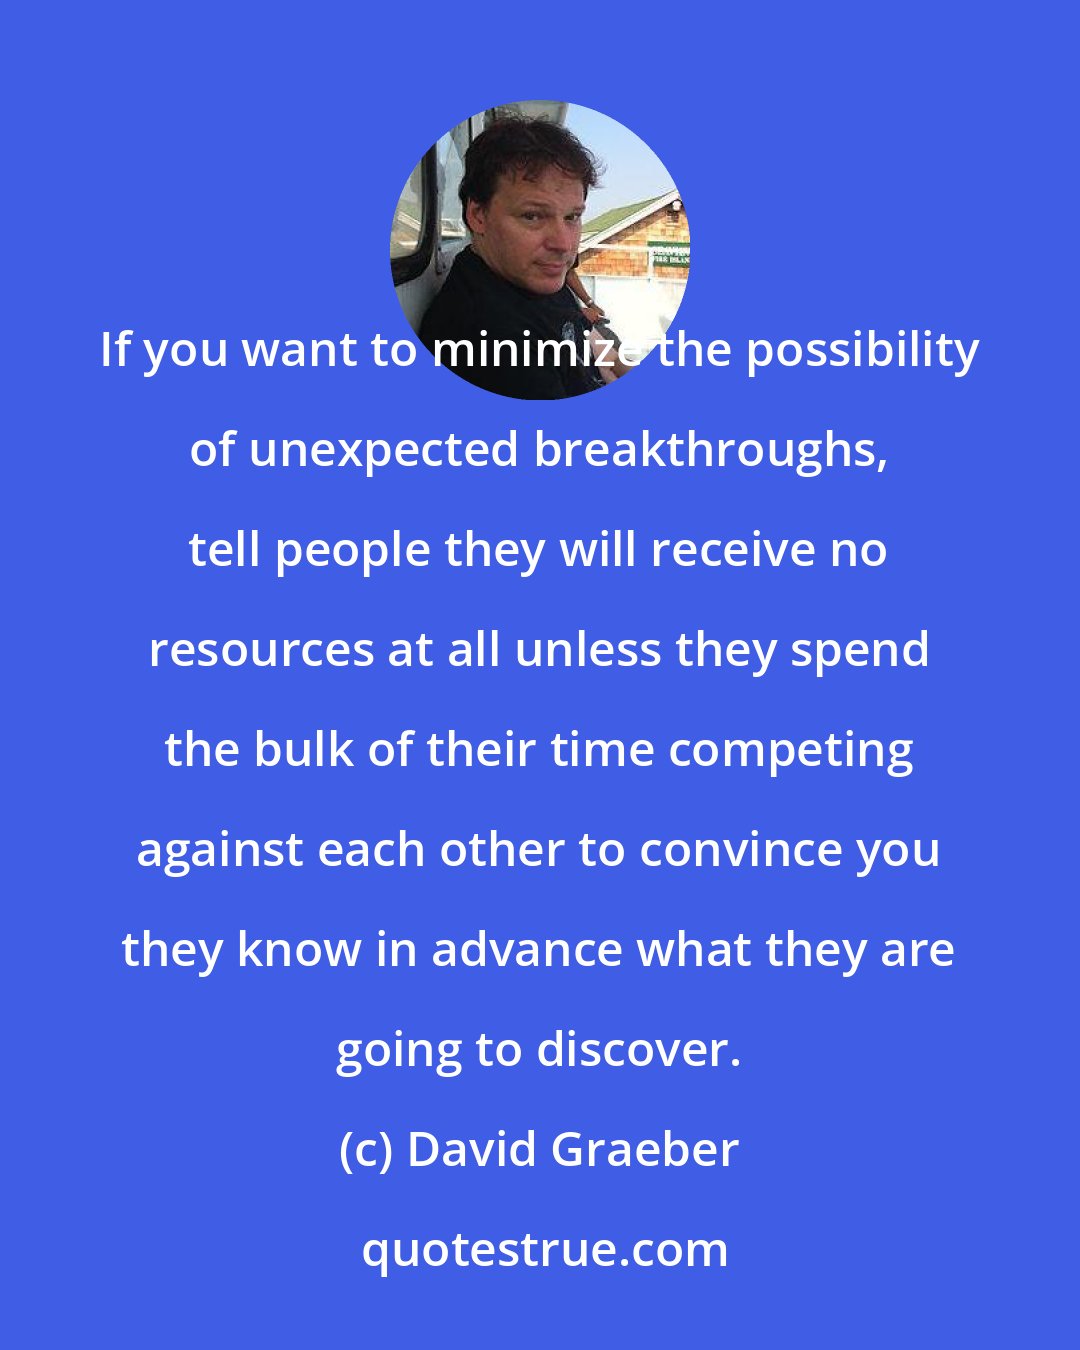 David Graeber: If you want to minimize the possibility of unexpected breakthroughs, tell people they will receive no resources at all unless they spend the bulk of their time competing against each other to convince you they know in advance what they are going to discover.